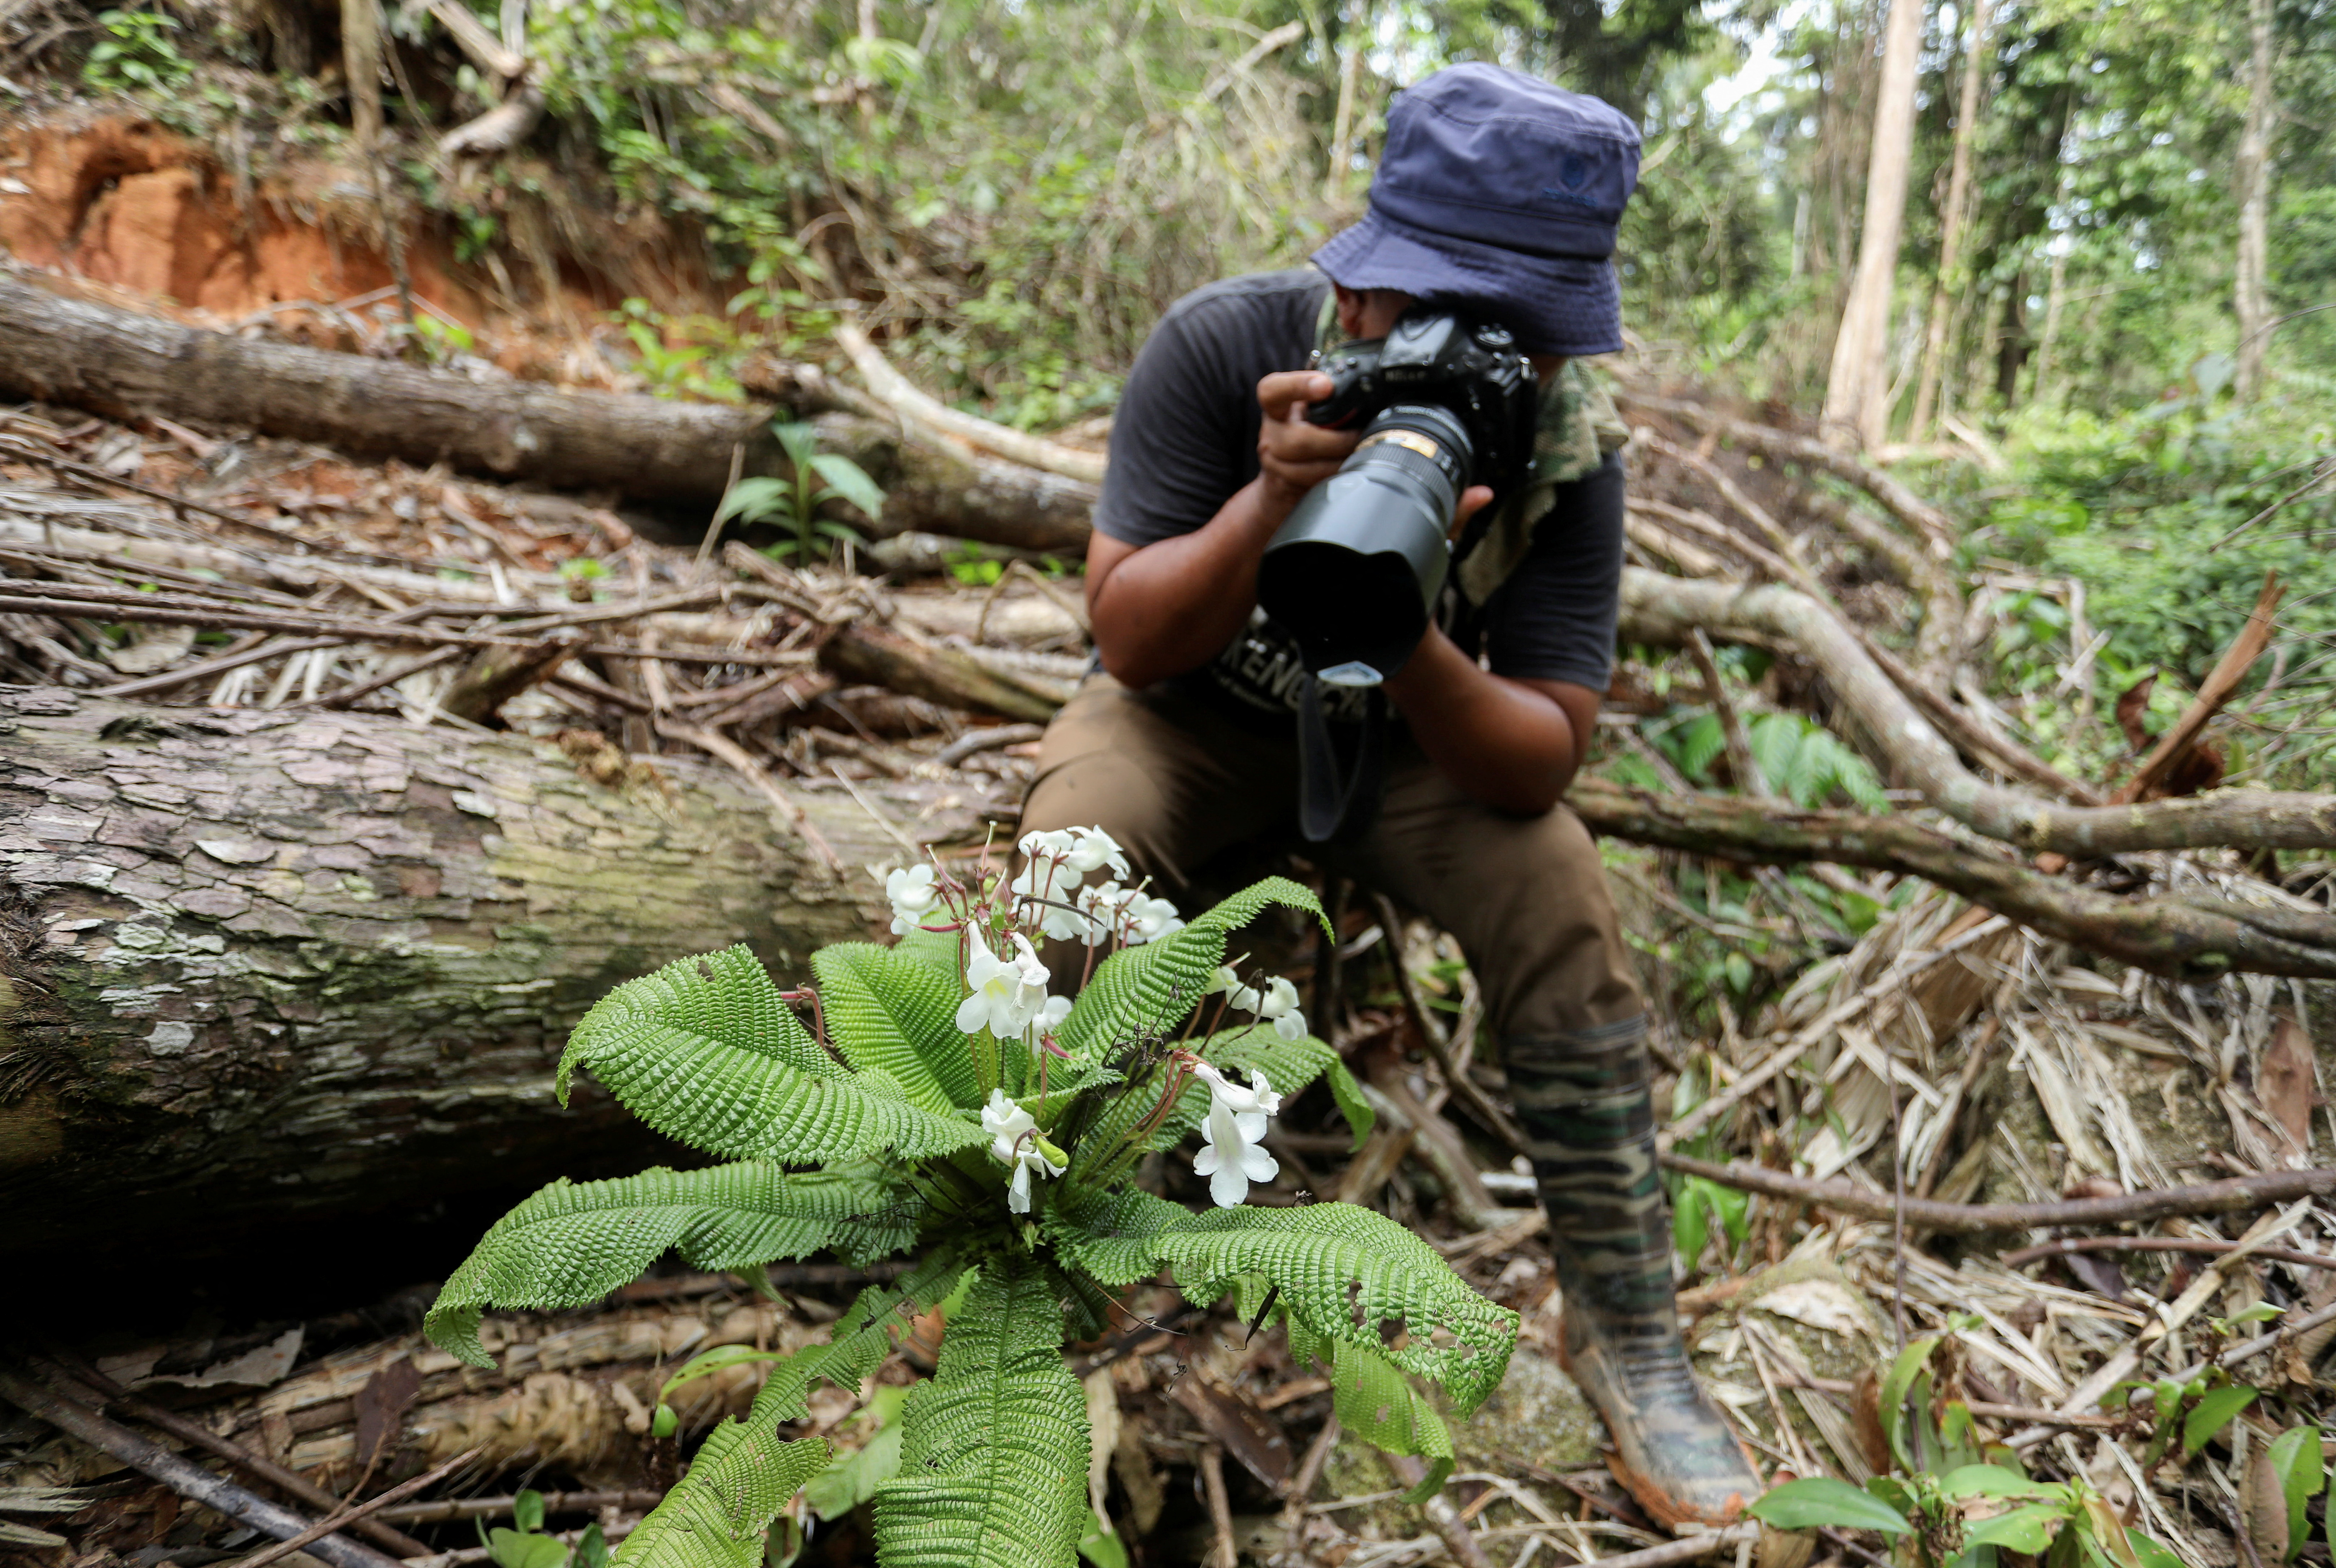 Malaysian photographer rescues thousands of forest plants from logging